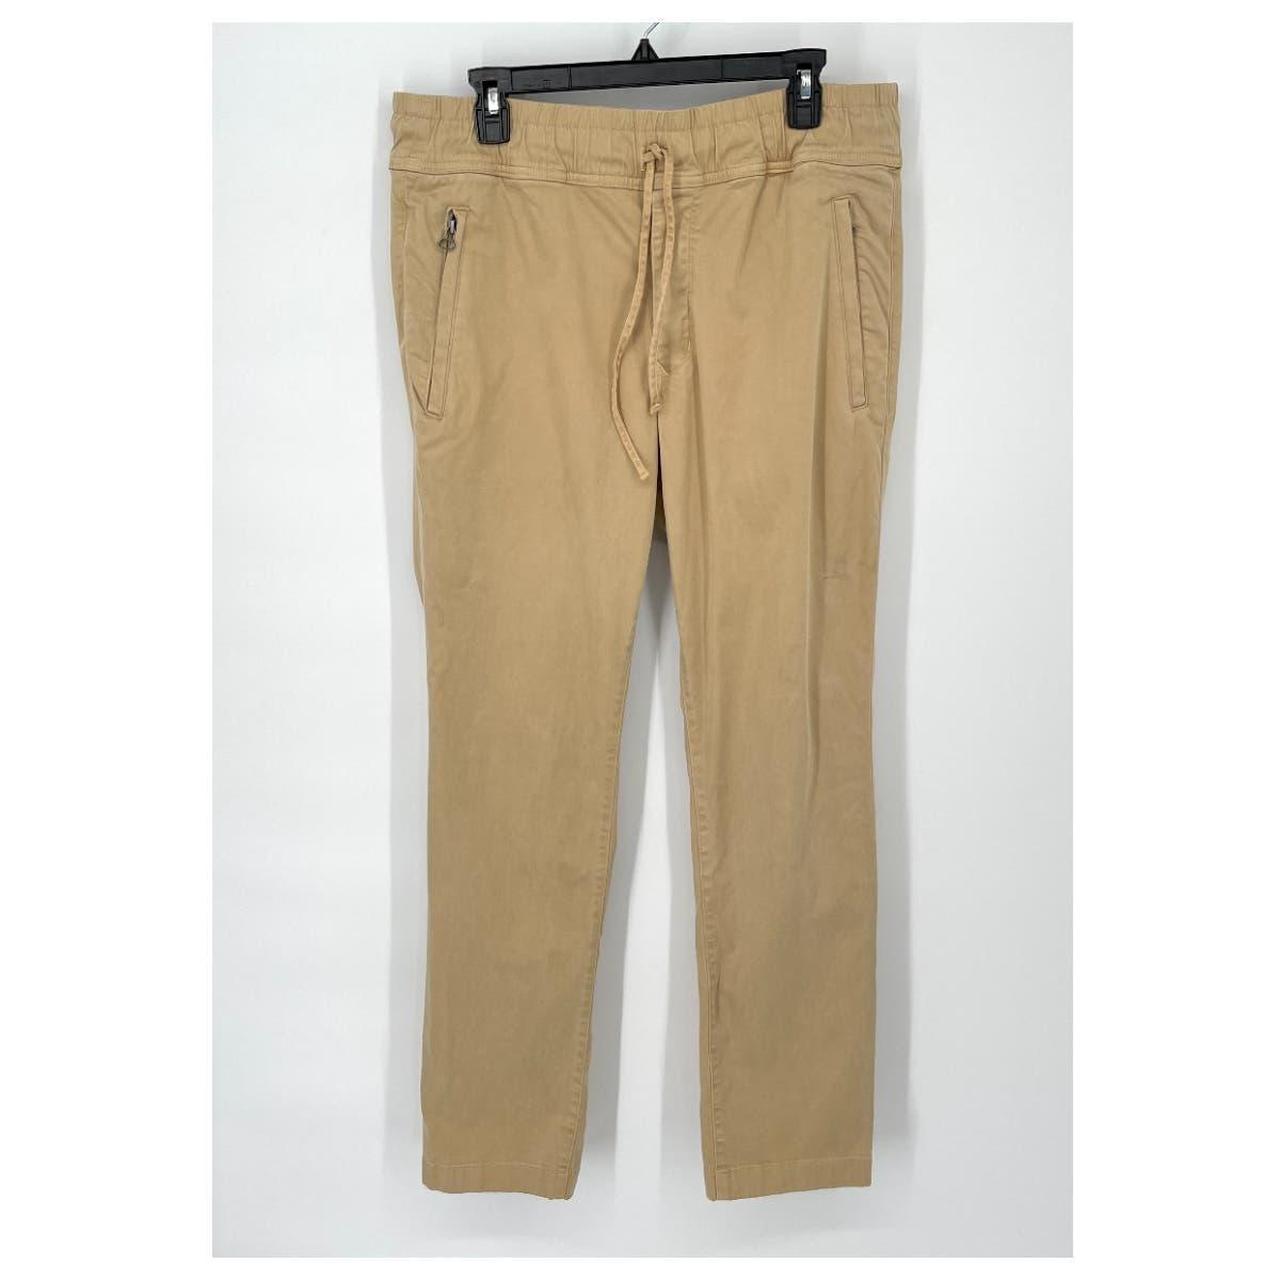 Men's Cotton Plain Regular Fit Pant, Size: 30-38 inch at Rs 440 in Ludhiana